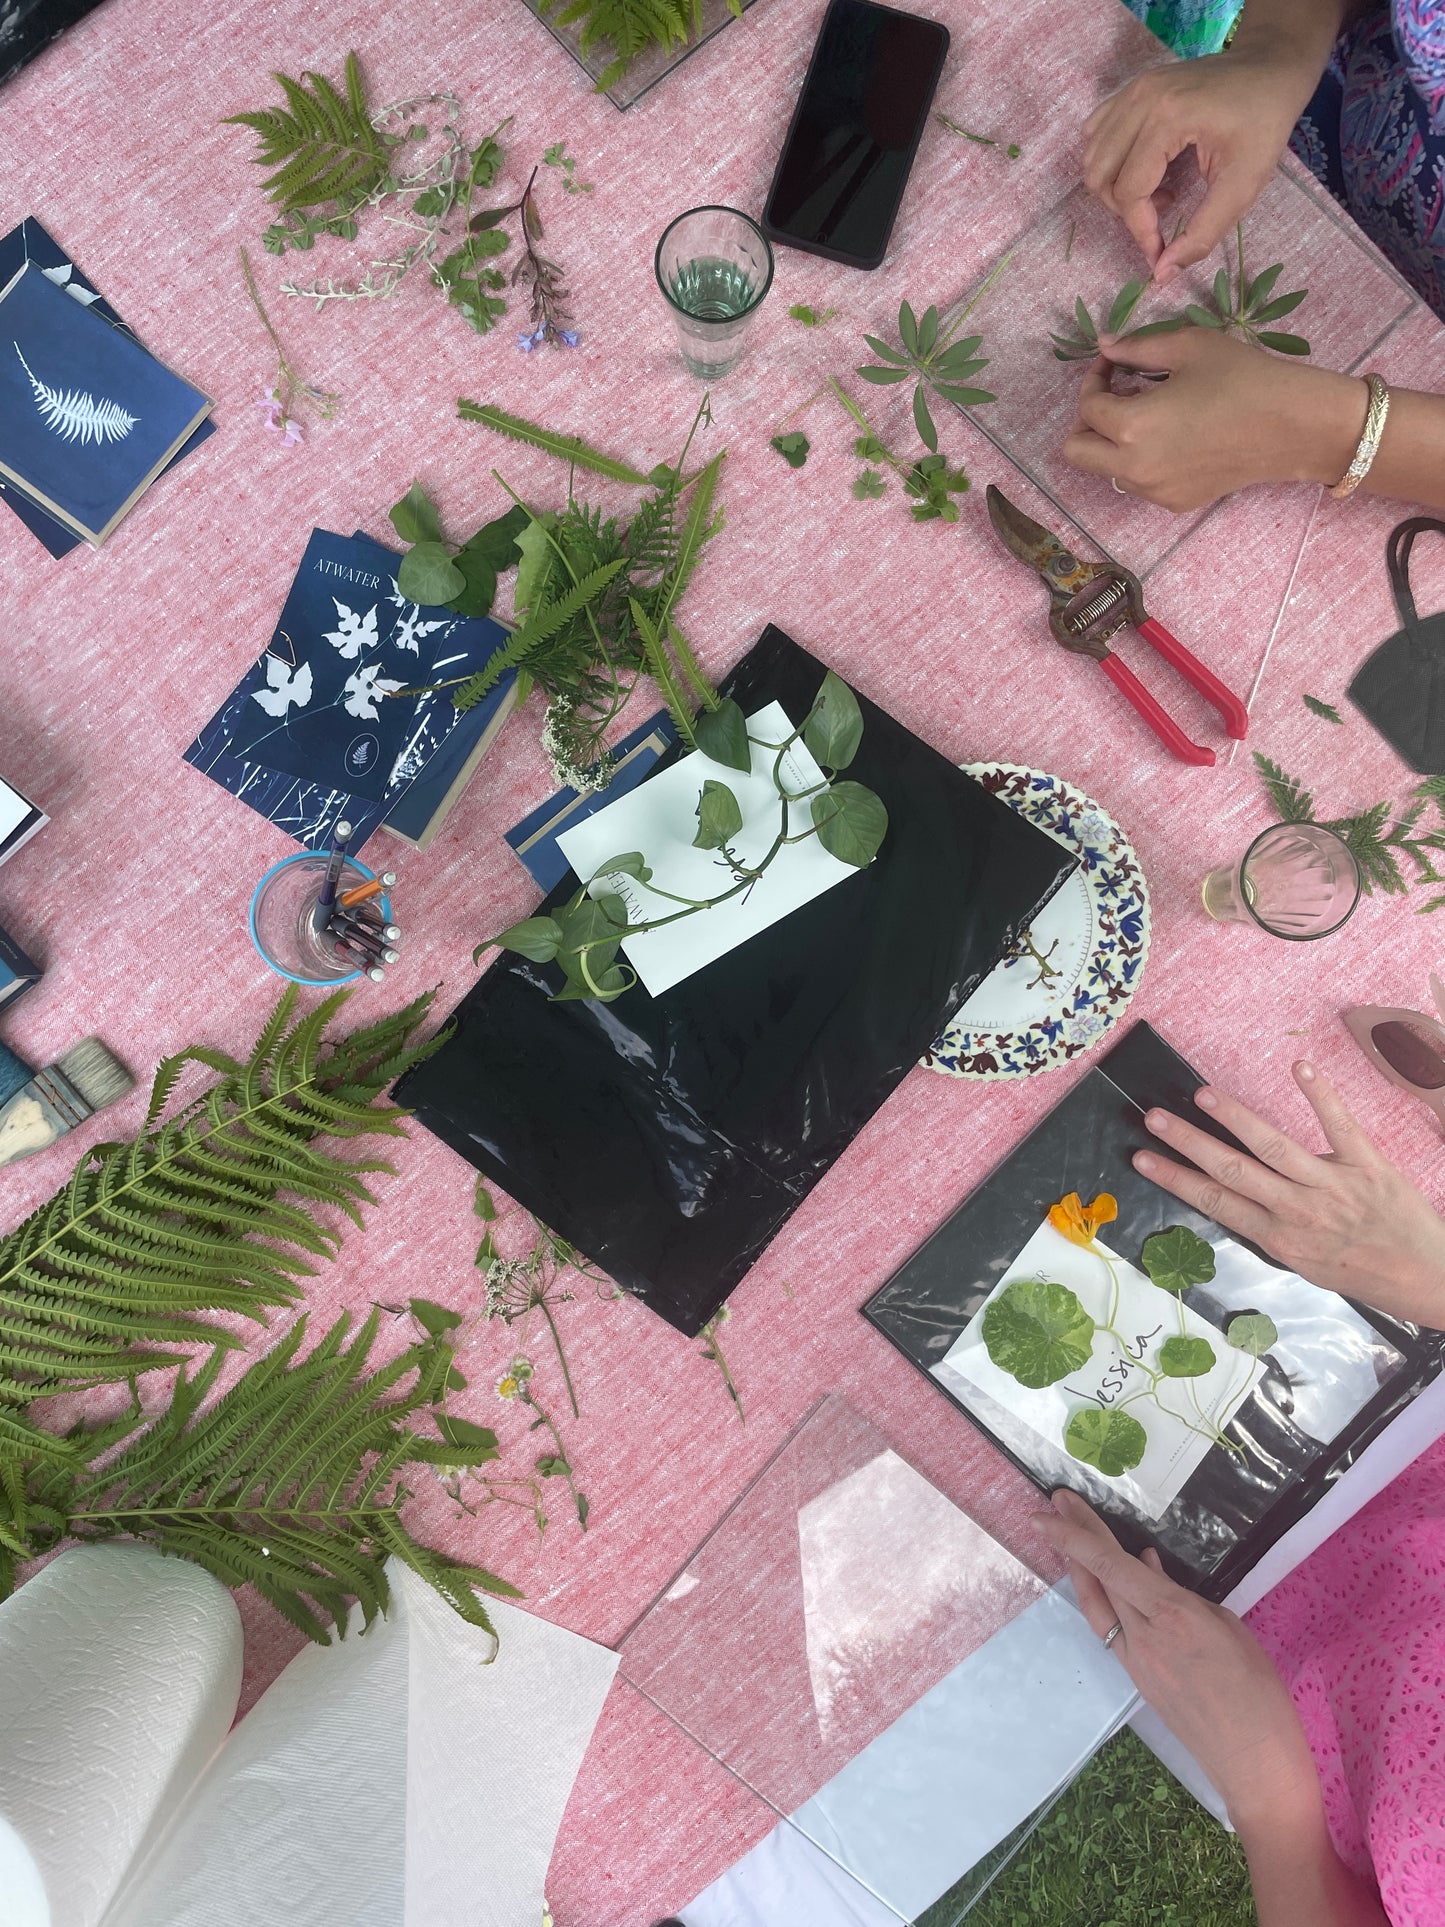 May 12 - Mother's Day Cyanotype Workshop